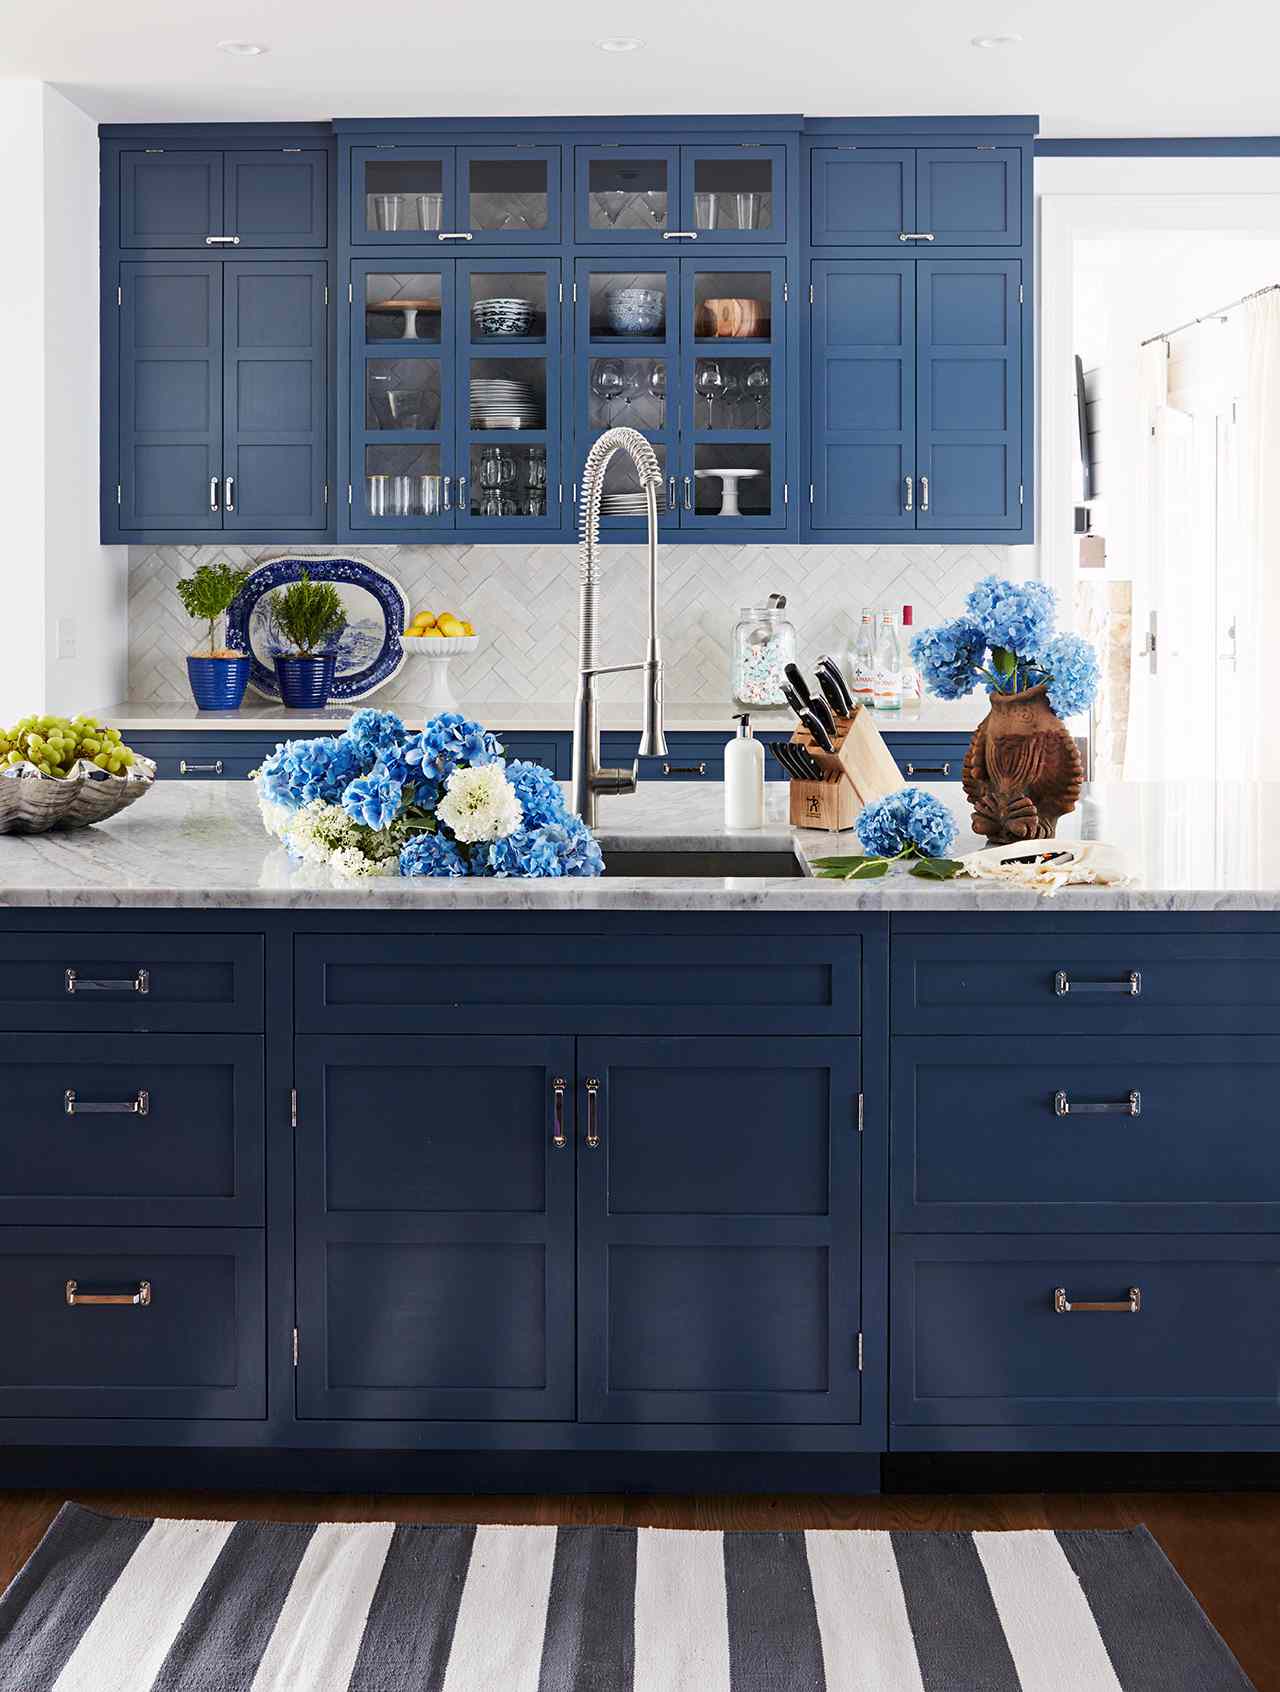 How To Paint Laminate Cabinets For An Easy Kitchen Refresh Better Homes Gardens